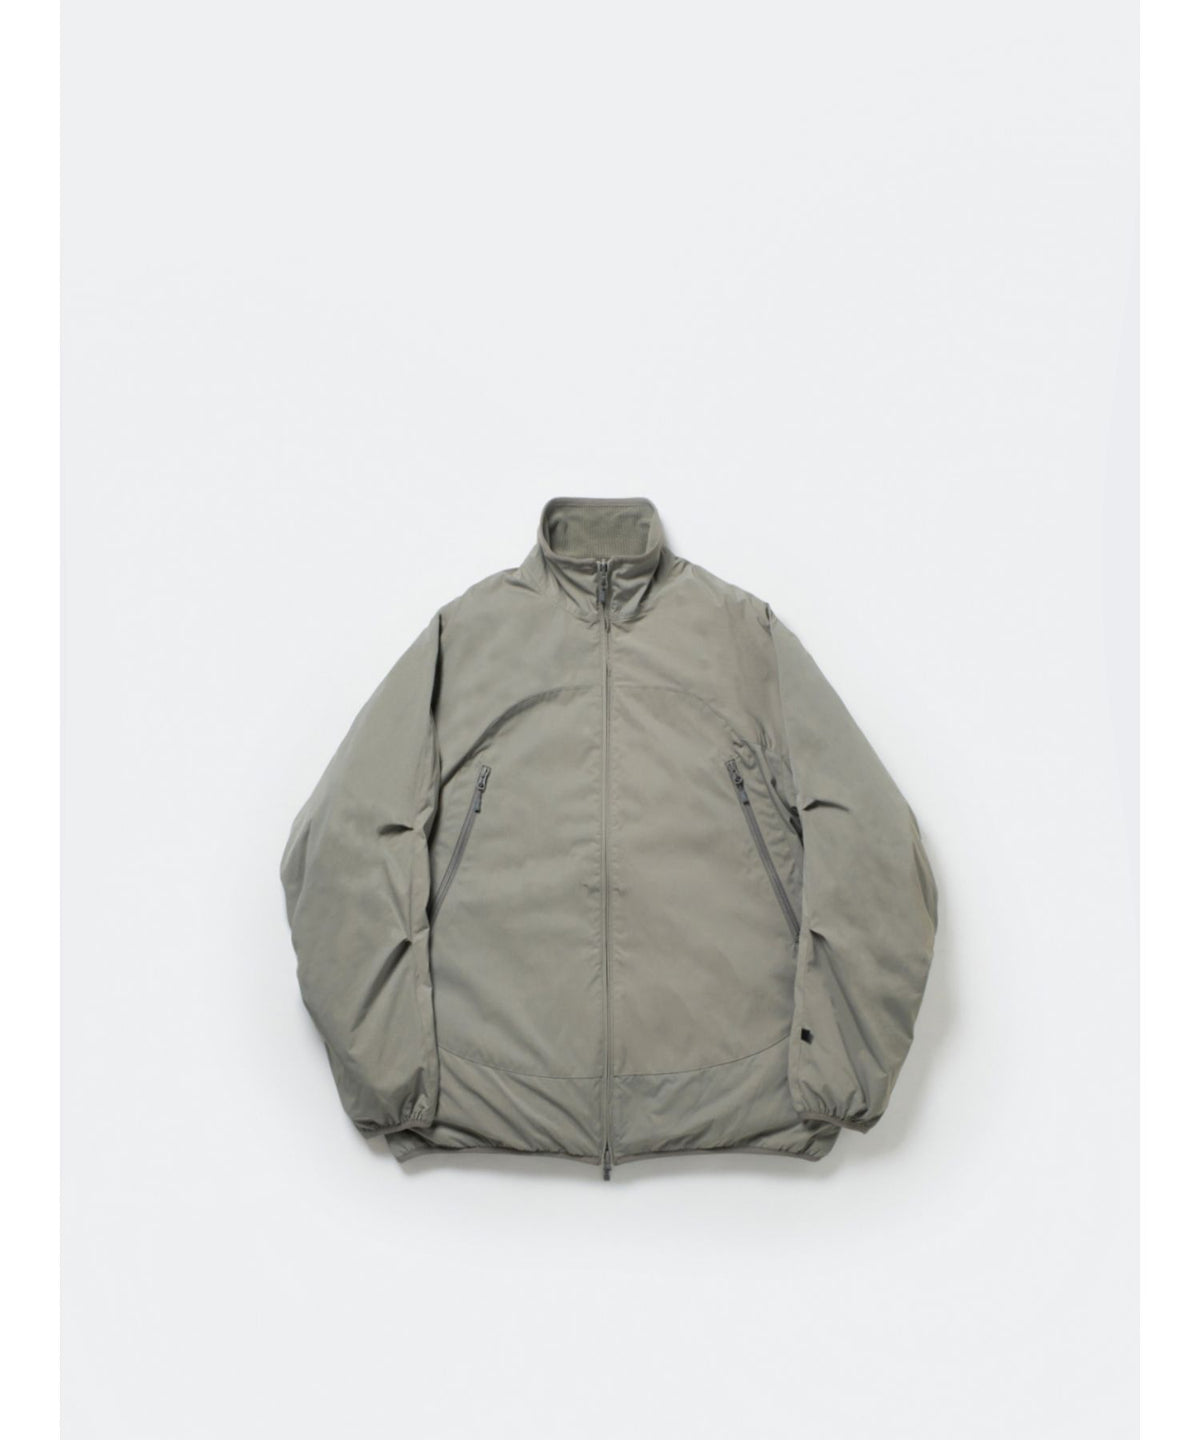 Tech Reversible Mil Ecwcs Stand Jacket